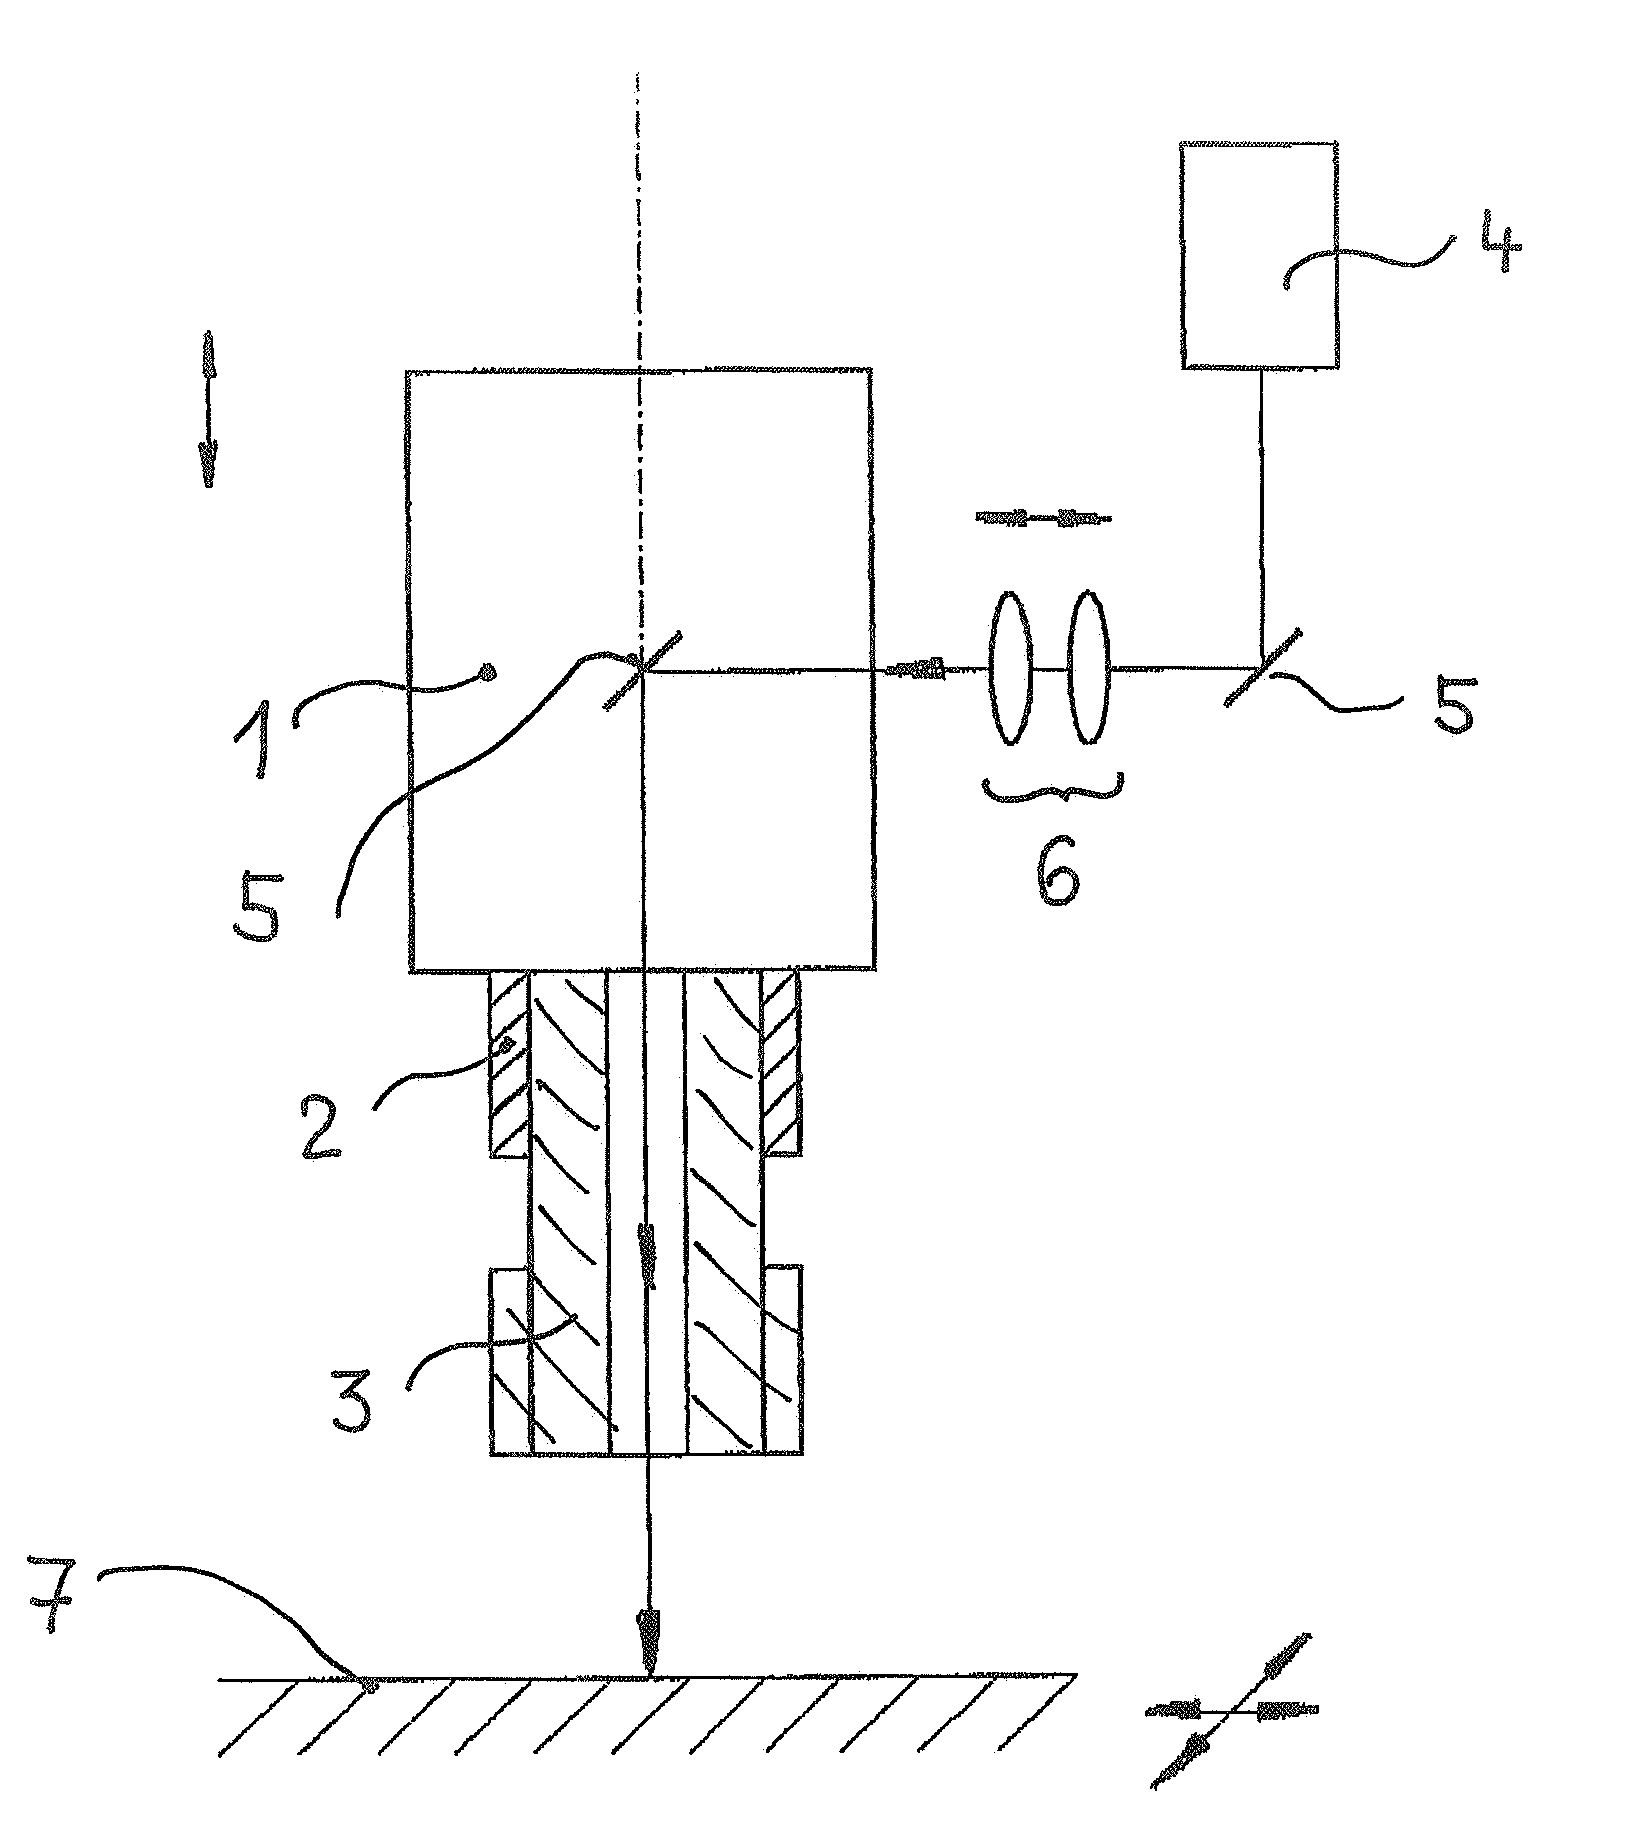 Combination apparatus for machining material with a milling cutter and a laser